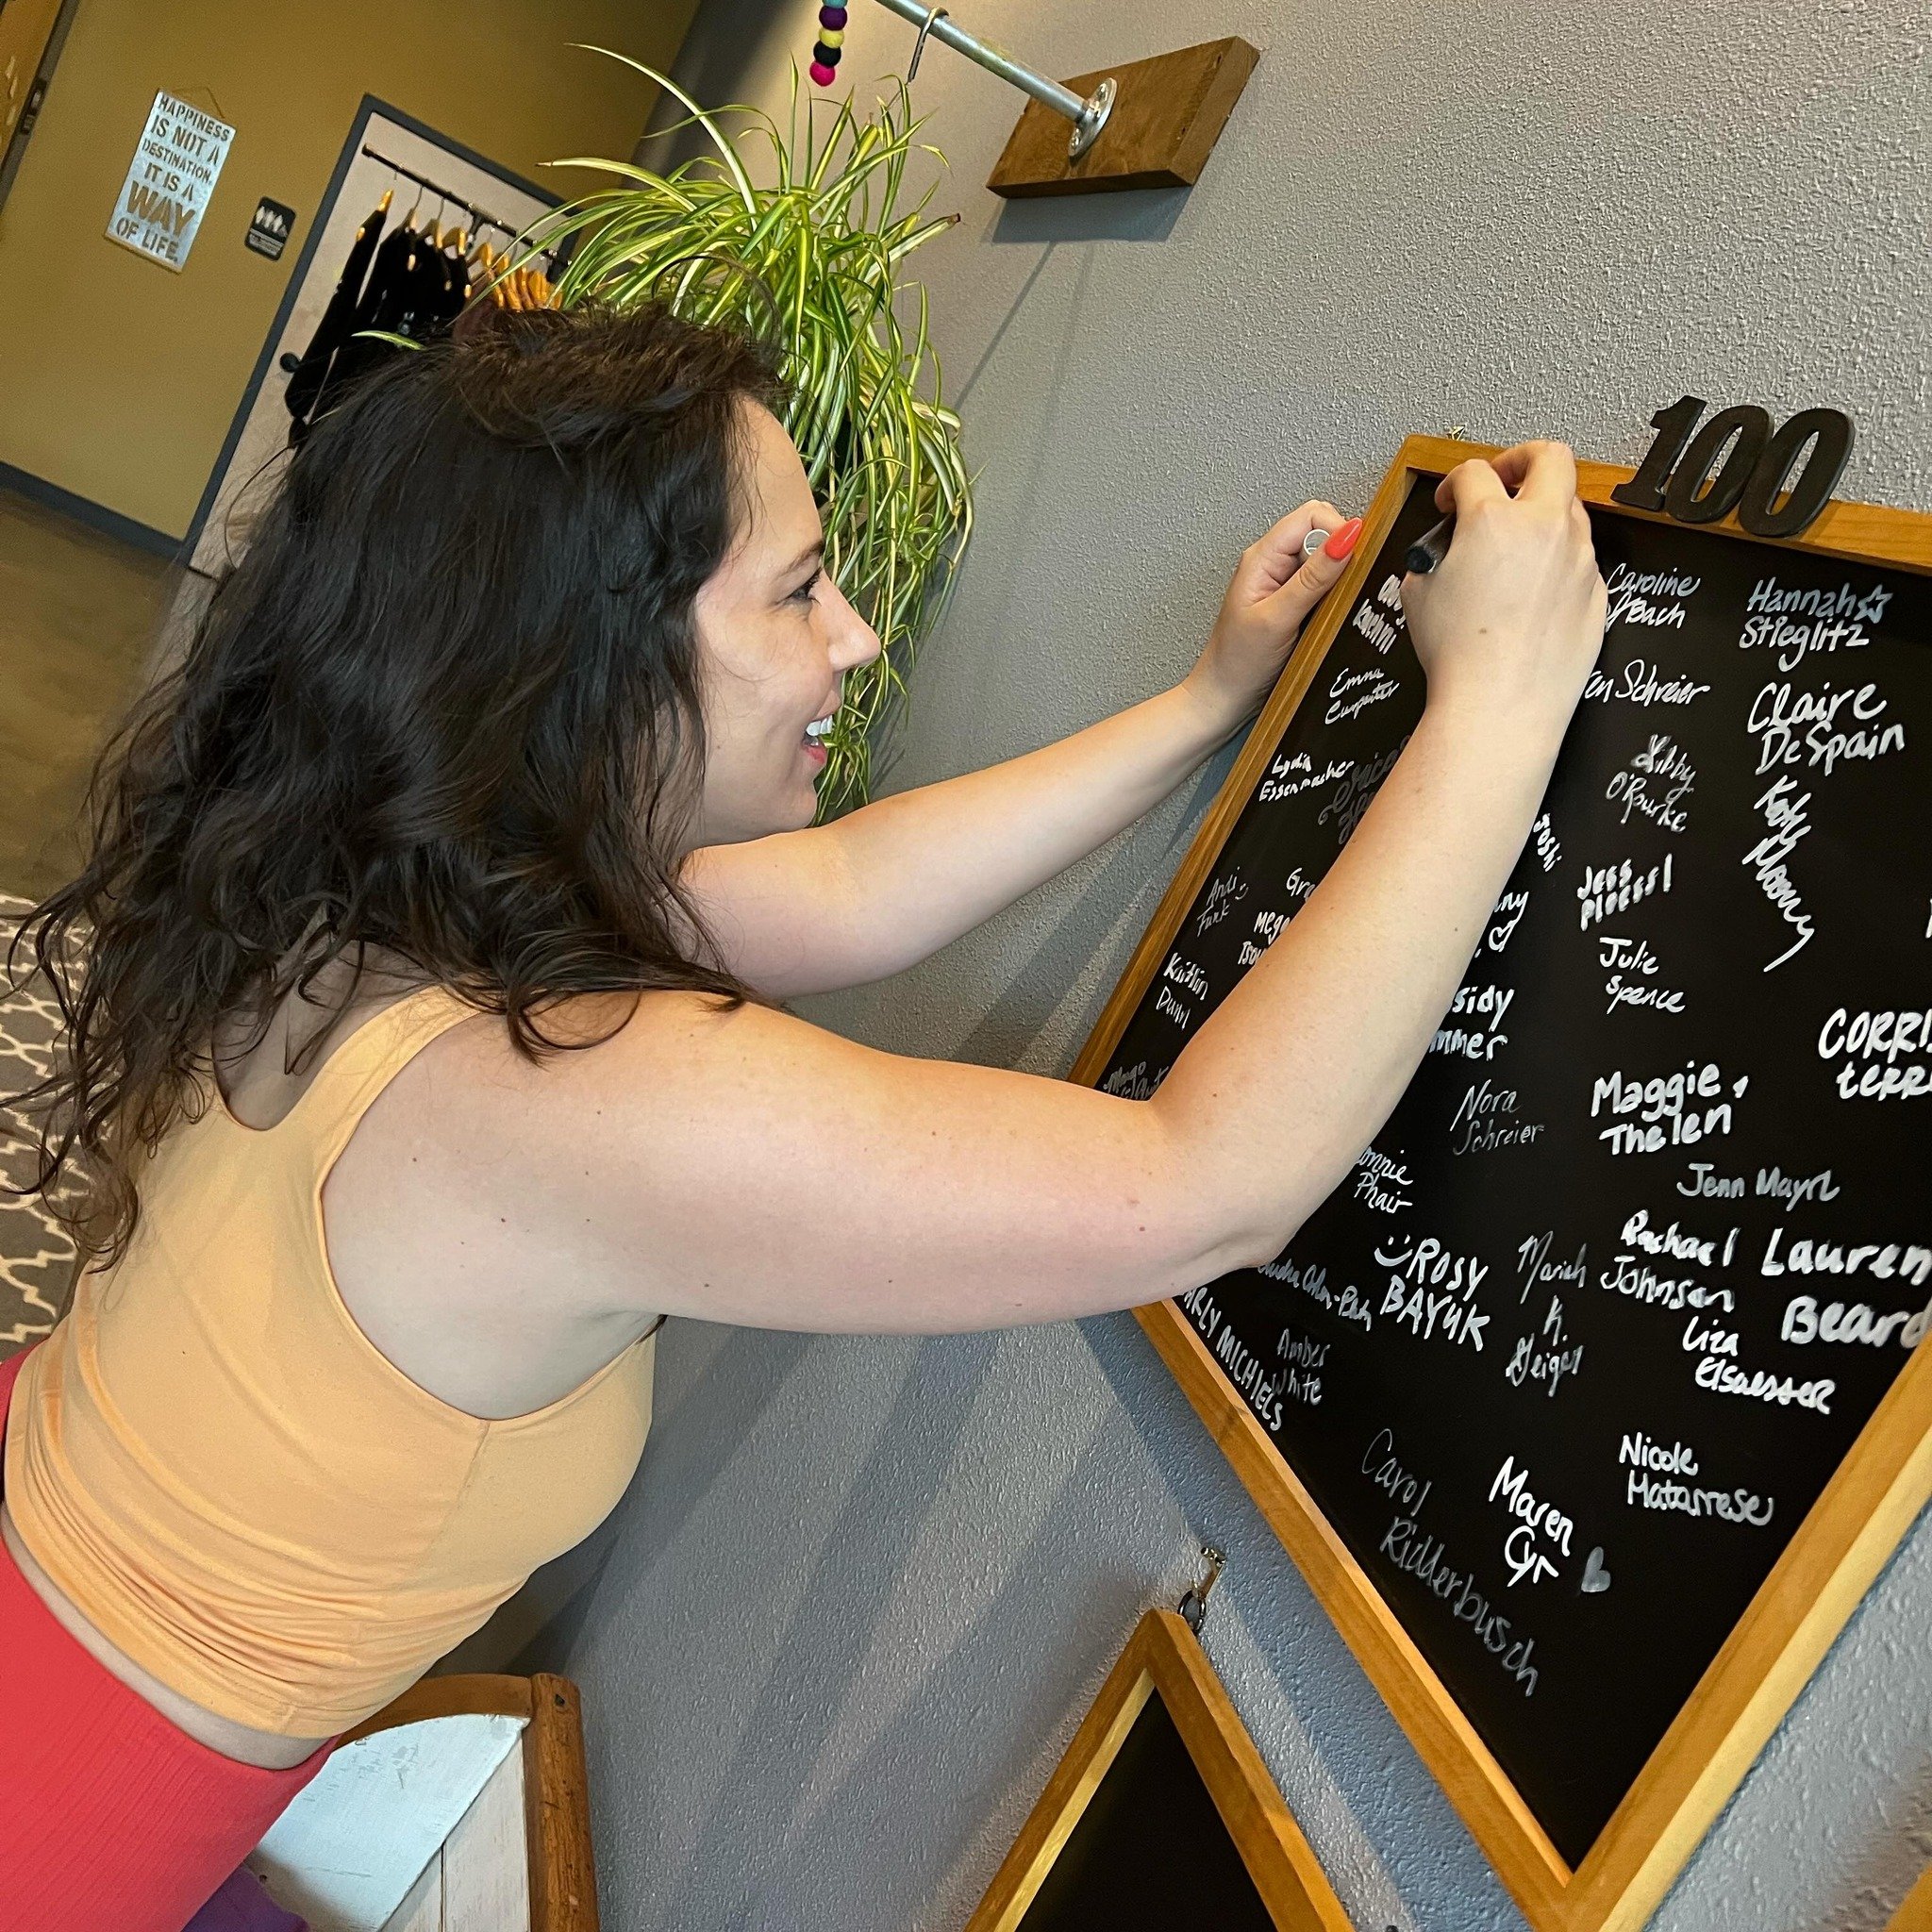 Proudly signing the 💯 milestone board! Way to go @allisongeyer ! Love your consistency&hellip;keep showing up for you! 🎊💪